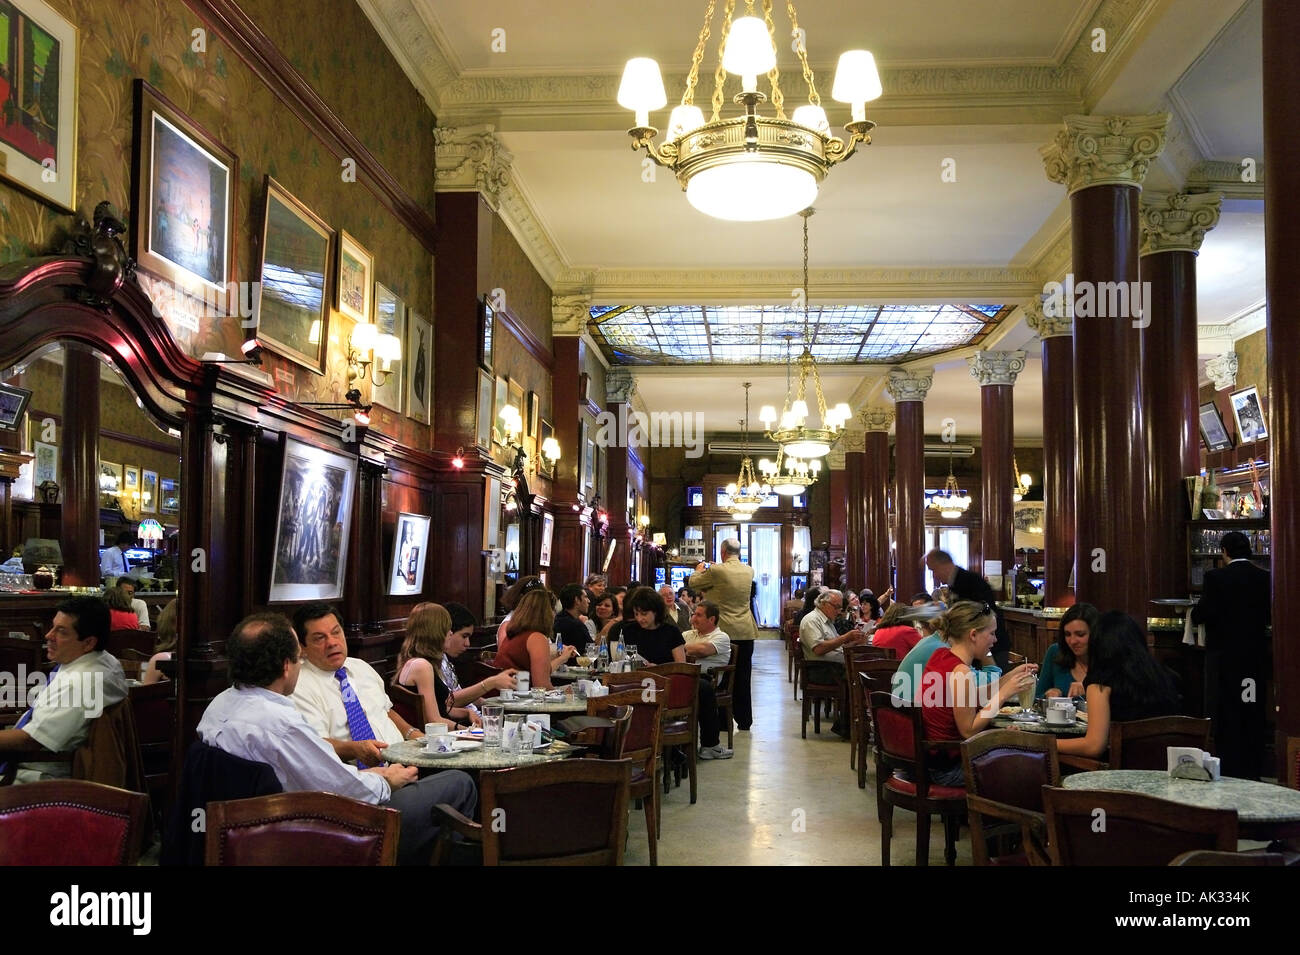 “Cafe Tortoni” inside view, Buenos Aires, Argentina Stock Photo